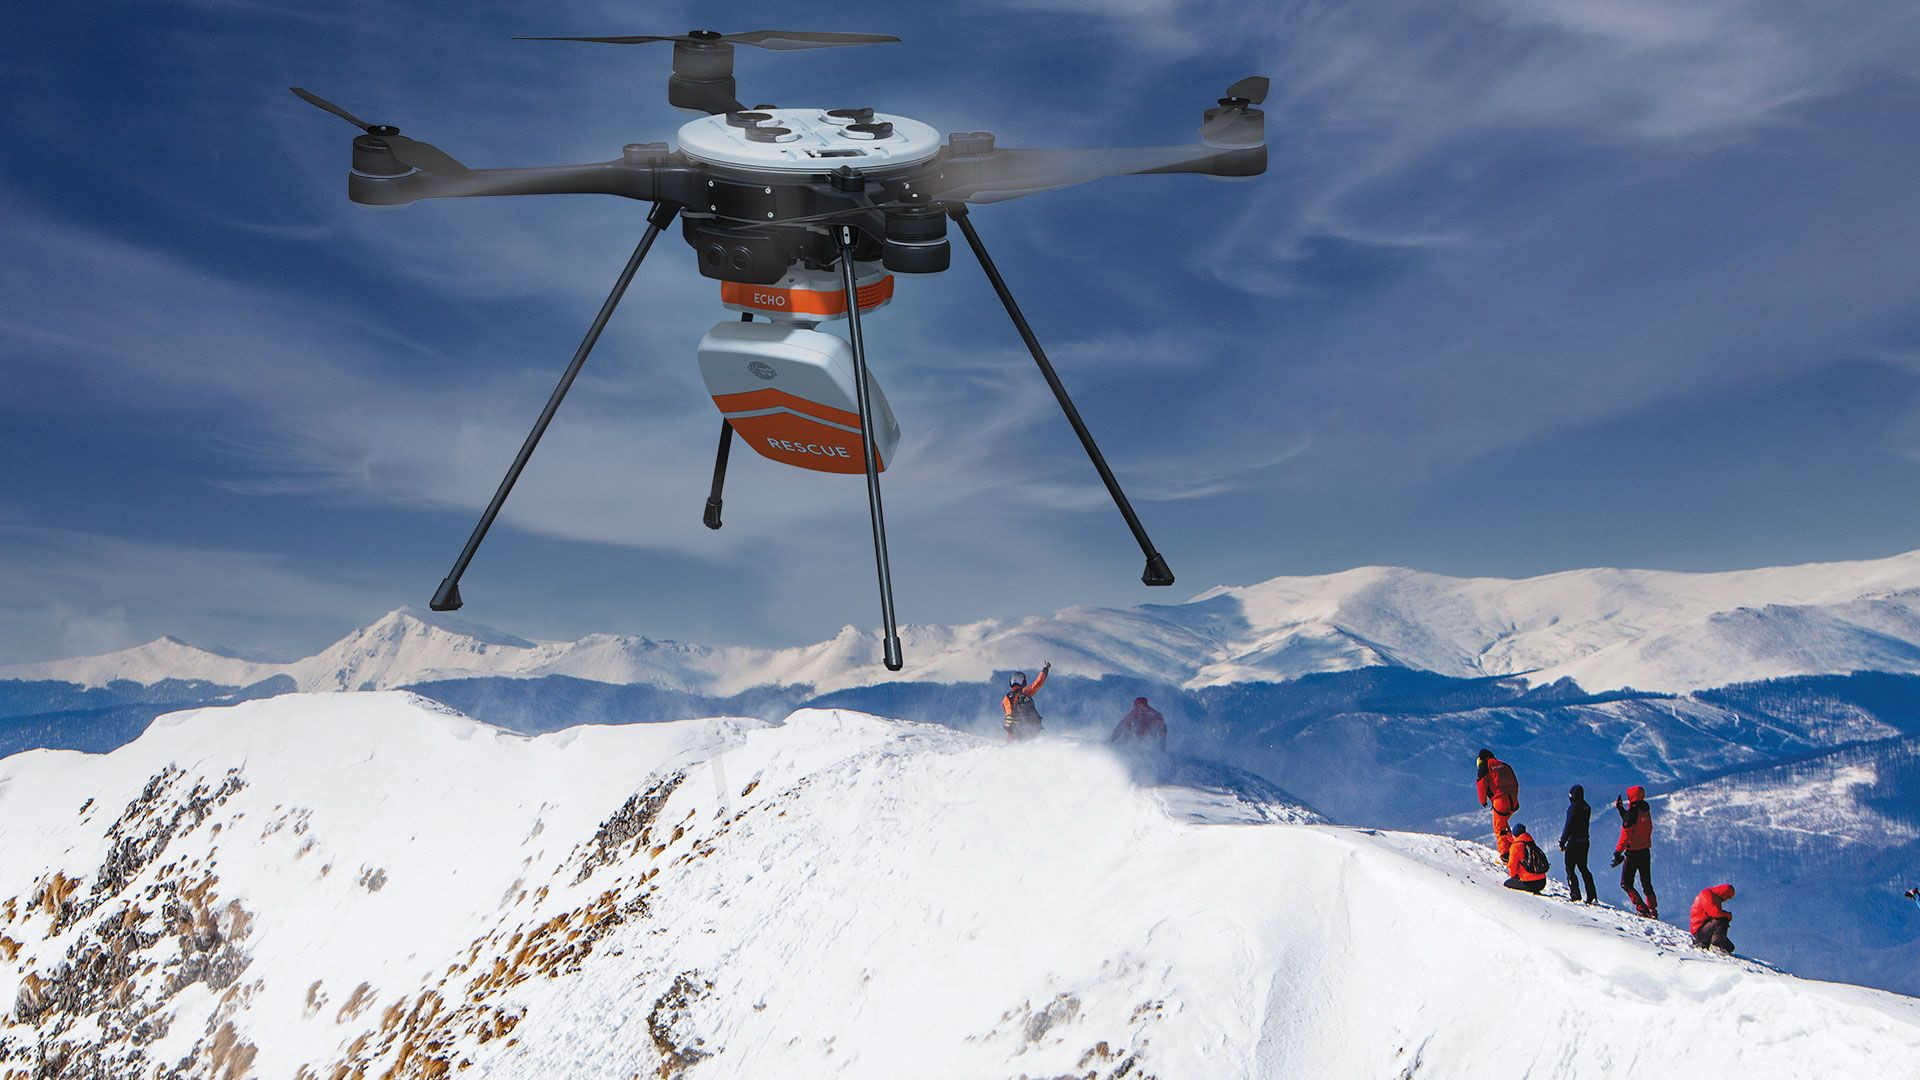 Air Ambulance Drones The Next Frontier In Emergency Response